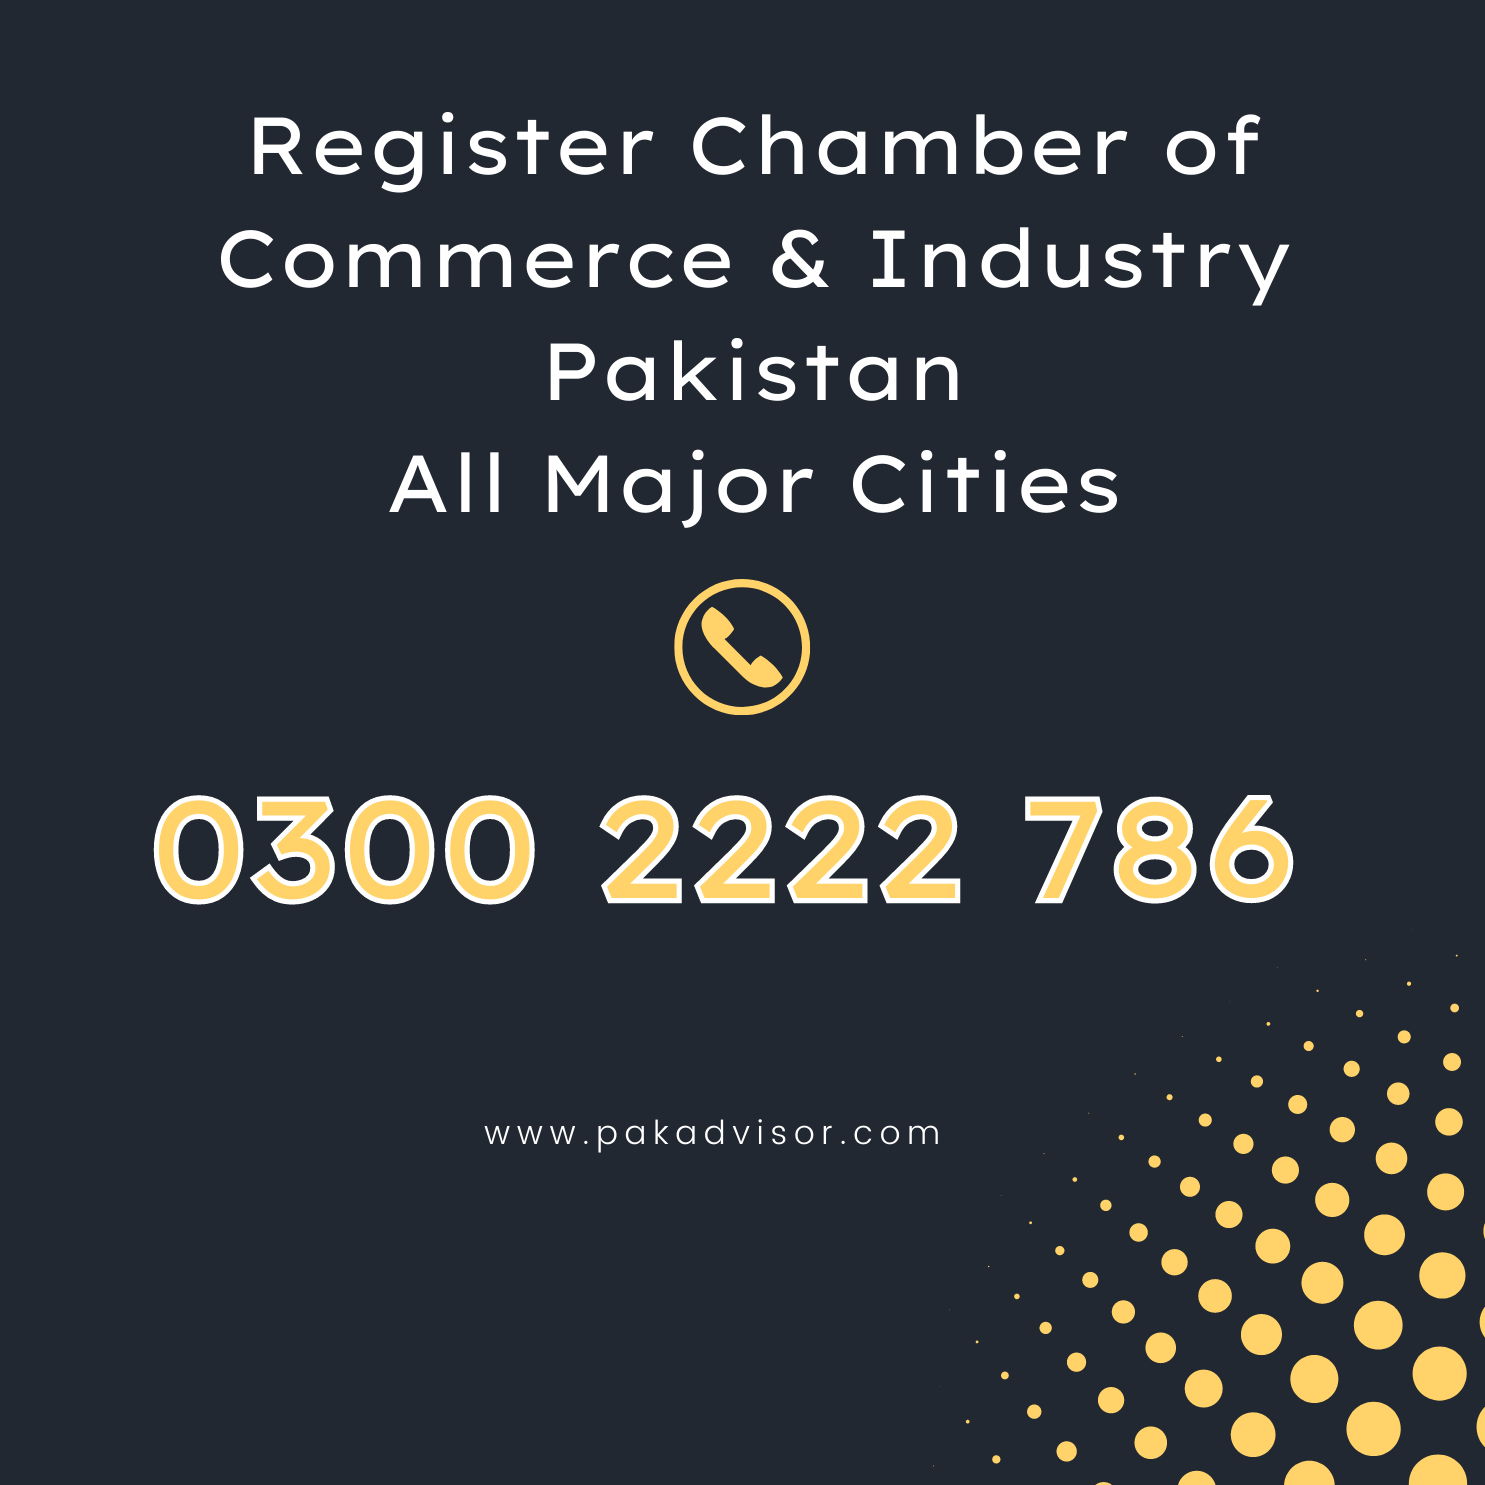 Register Chamber of Commerce and Industry Pakistan - All Major Cities